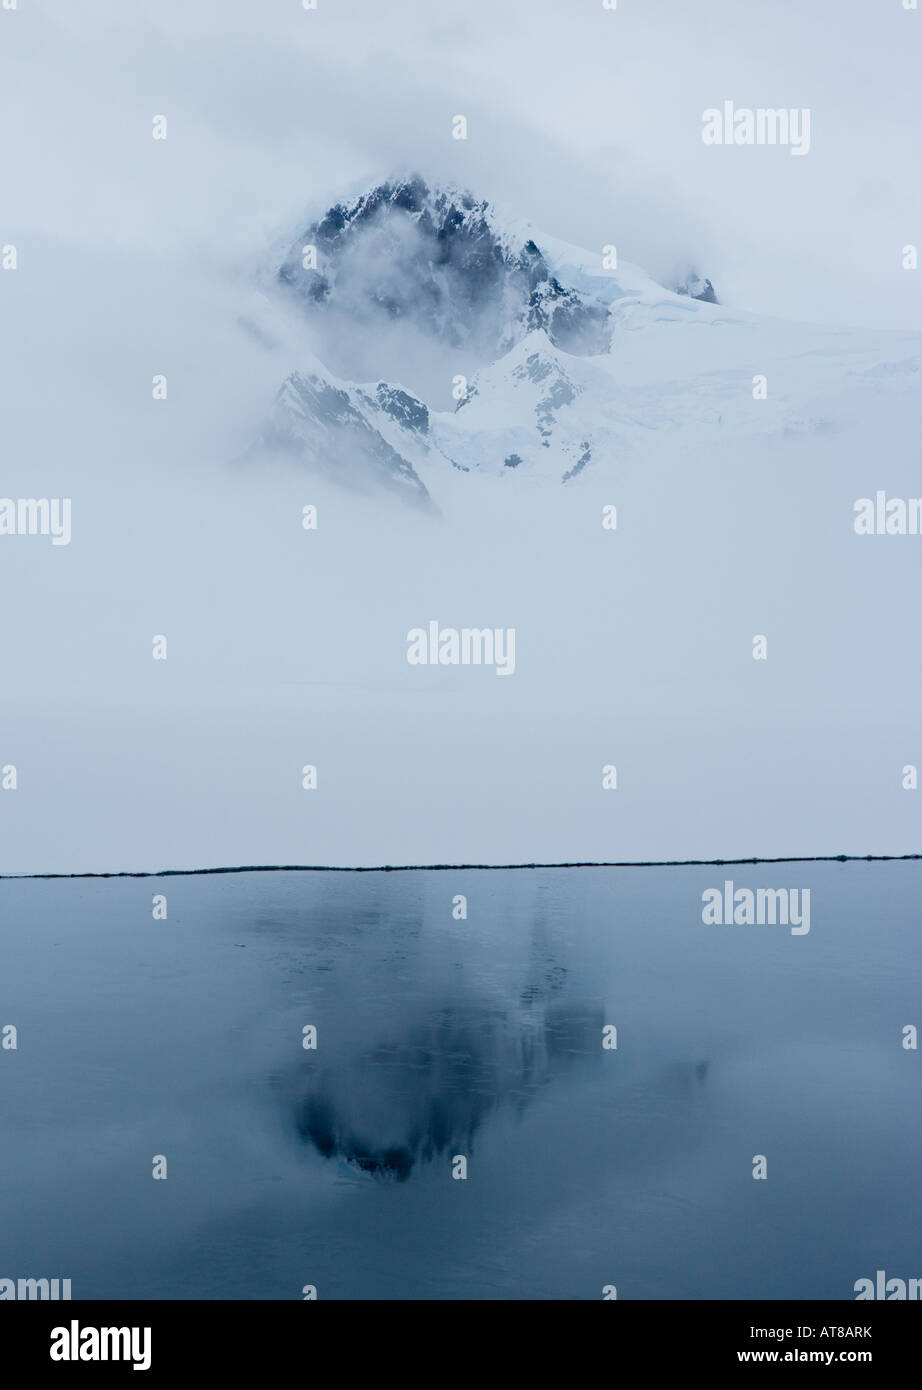 Peak of an antarctic mountain showing through the mist and reflected in the deep blue waters beneath Stock Photo